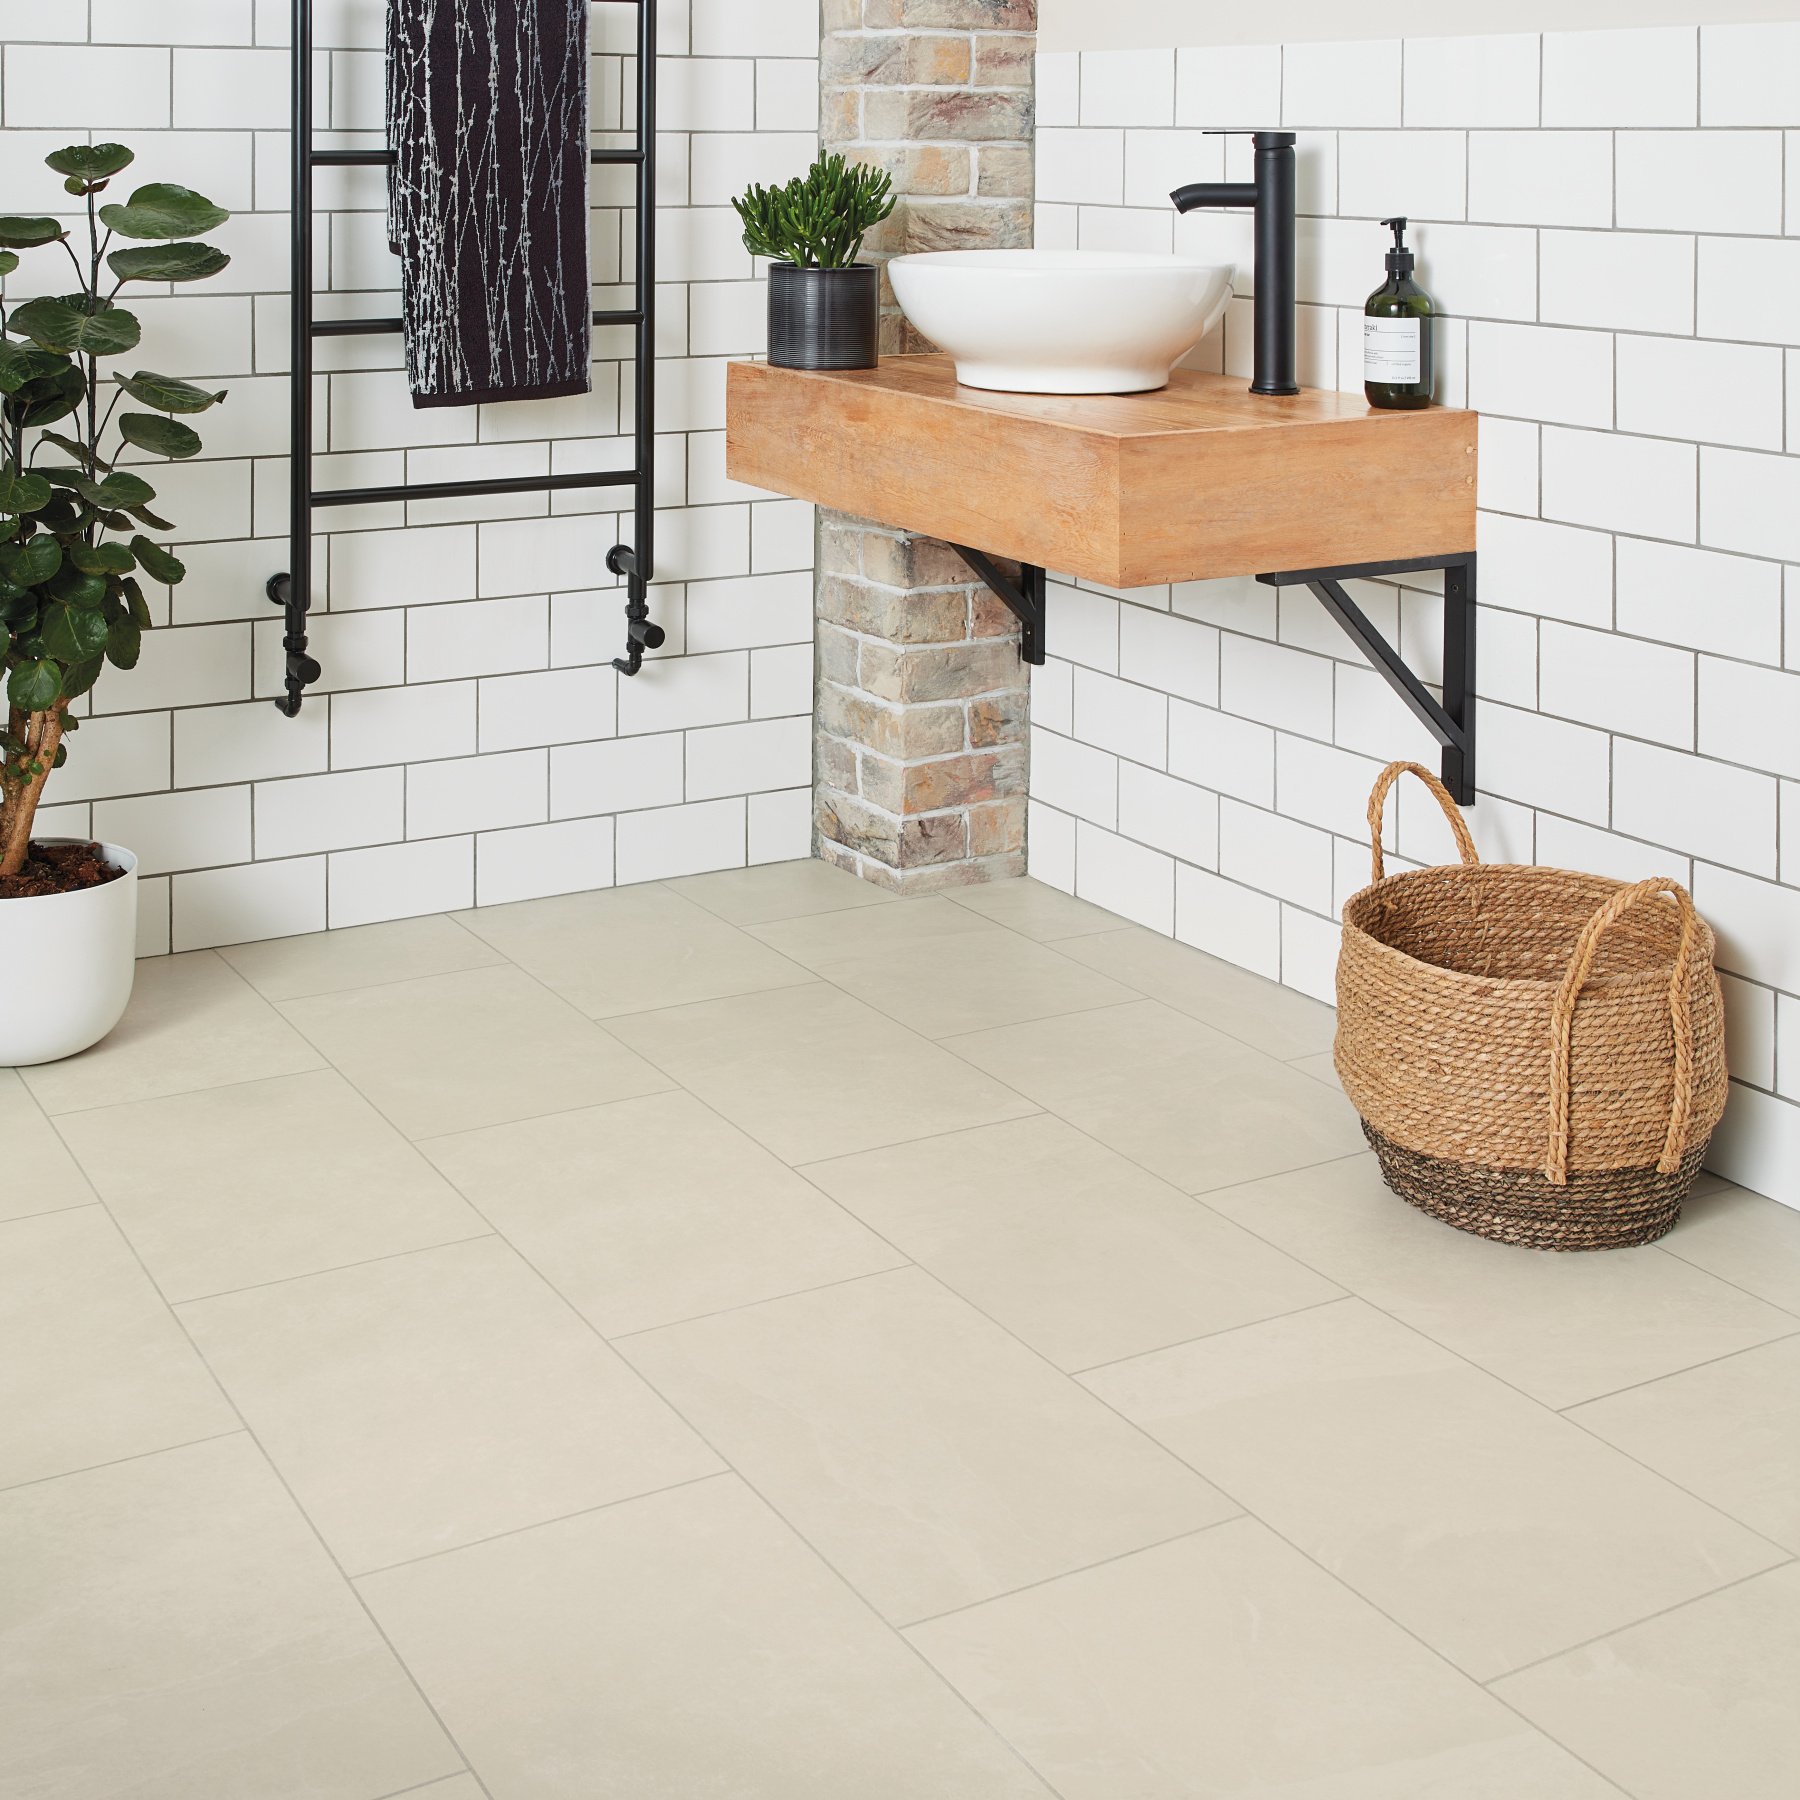 Karndean Ivory riven slate stone flooring with design strips in a bathroom